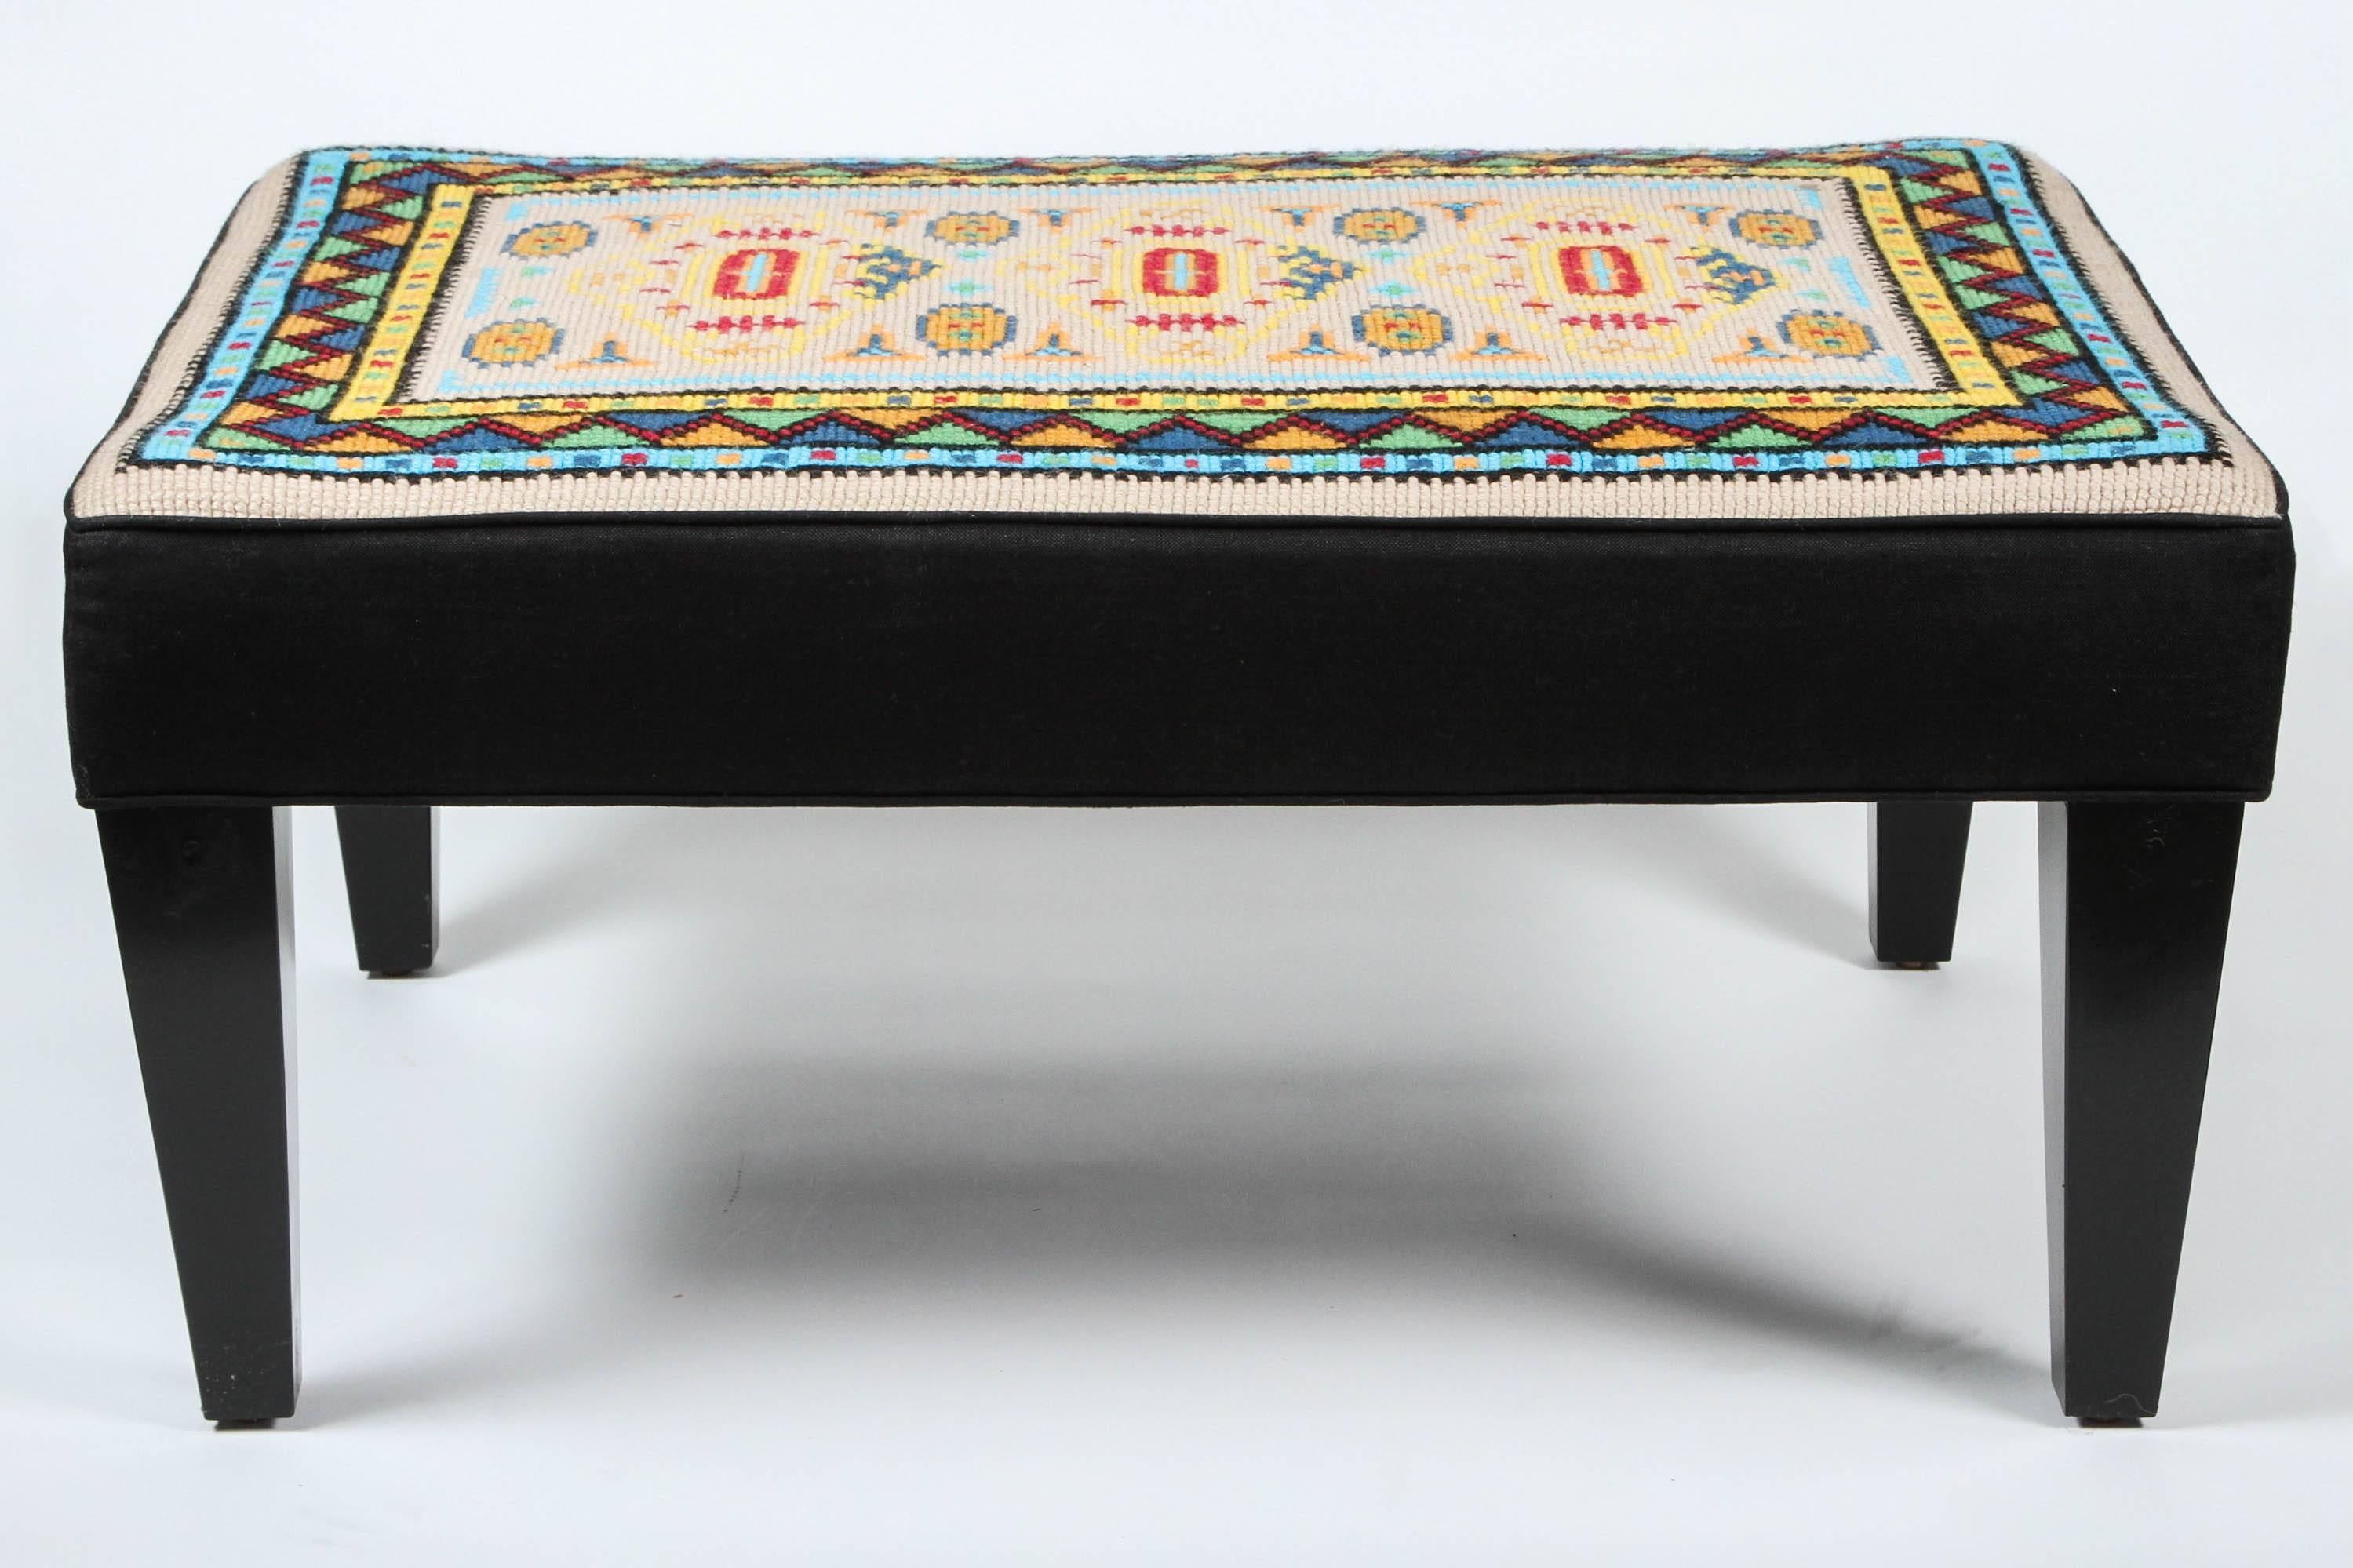 Vintage wool needlepoint panel newly made into an ottoman with linen sides and wood legs.